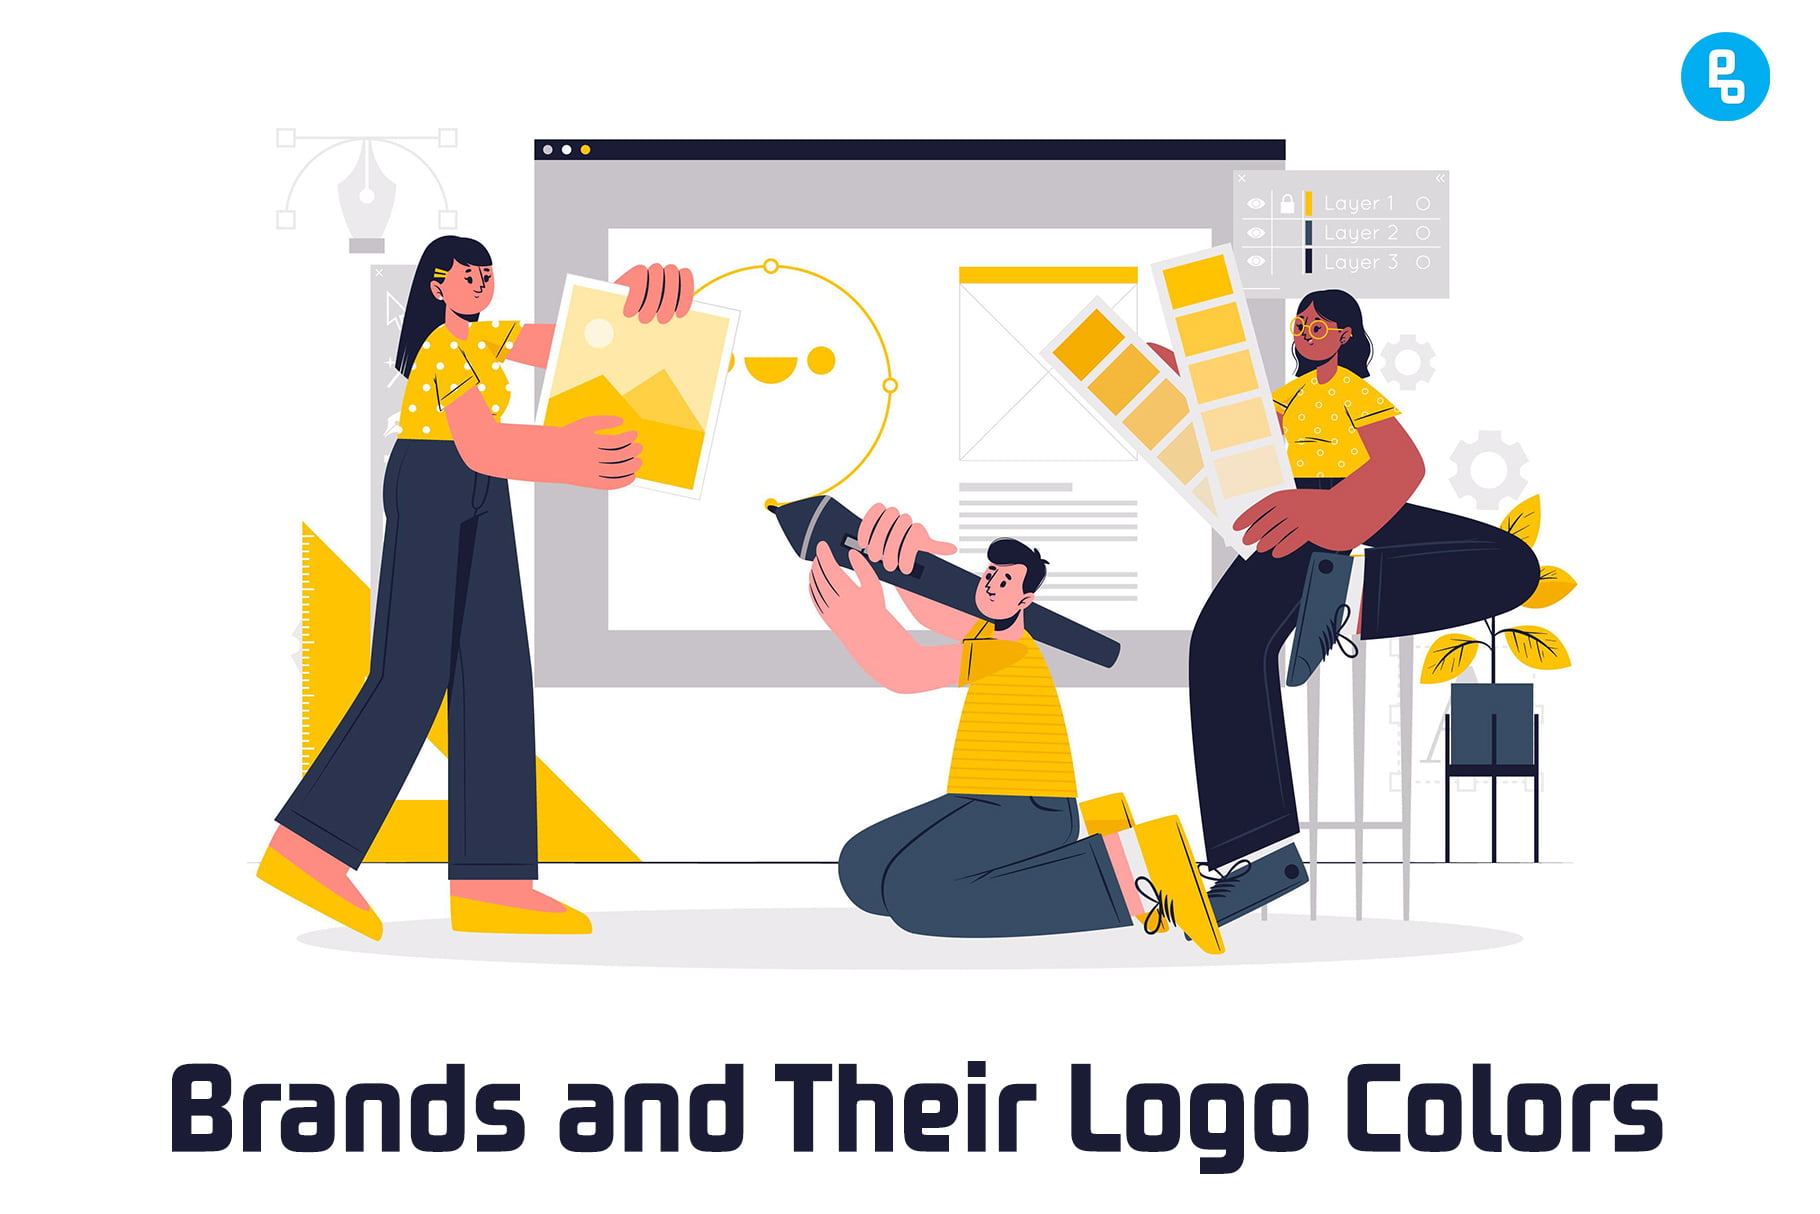 The color of your logo is one of the most important elements in its design. It not only affects how people feel about your brand but also how they perceive it.